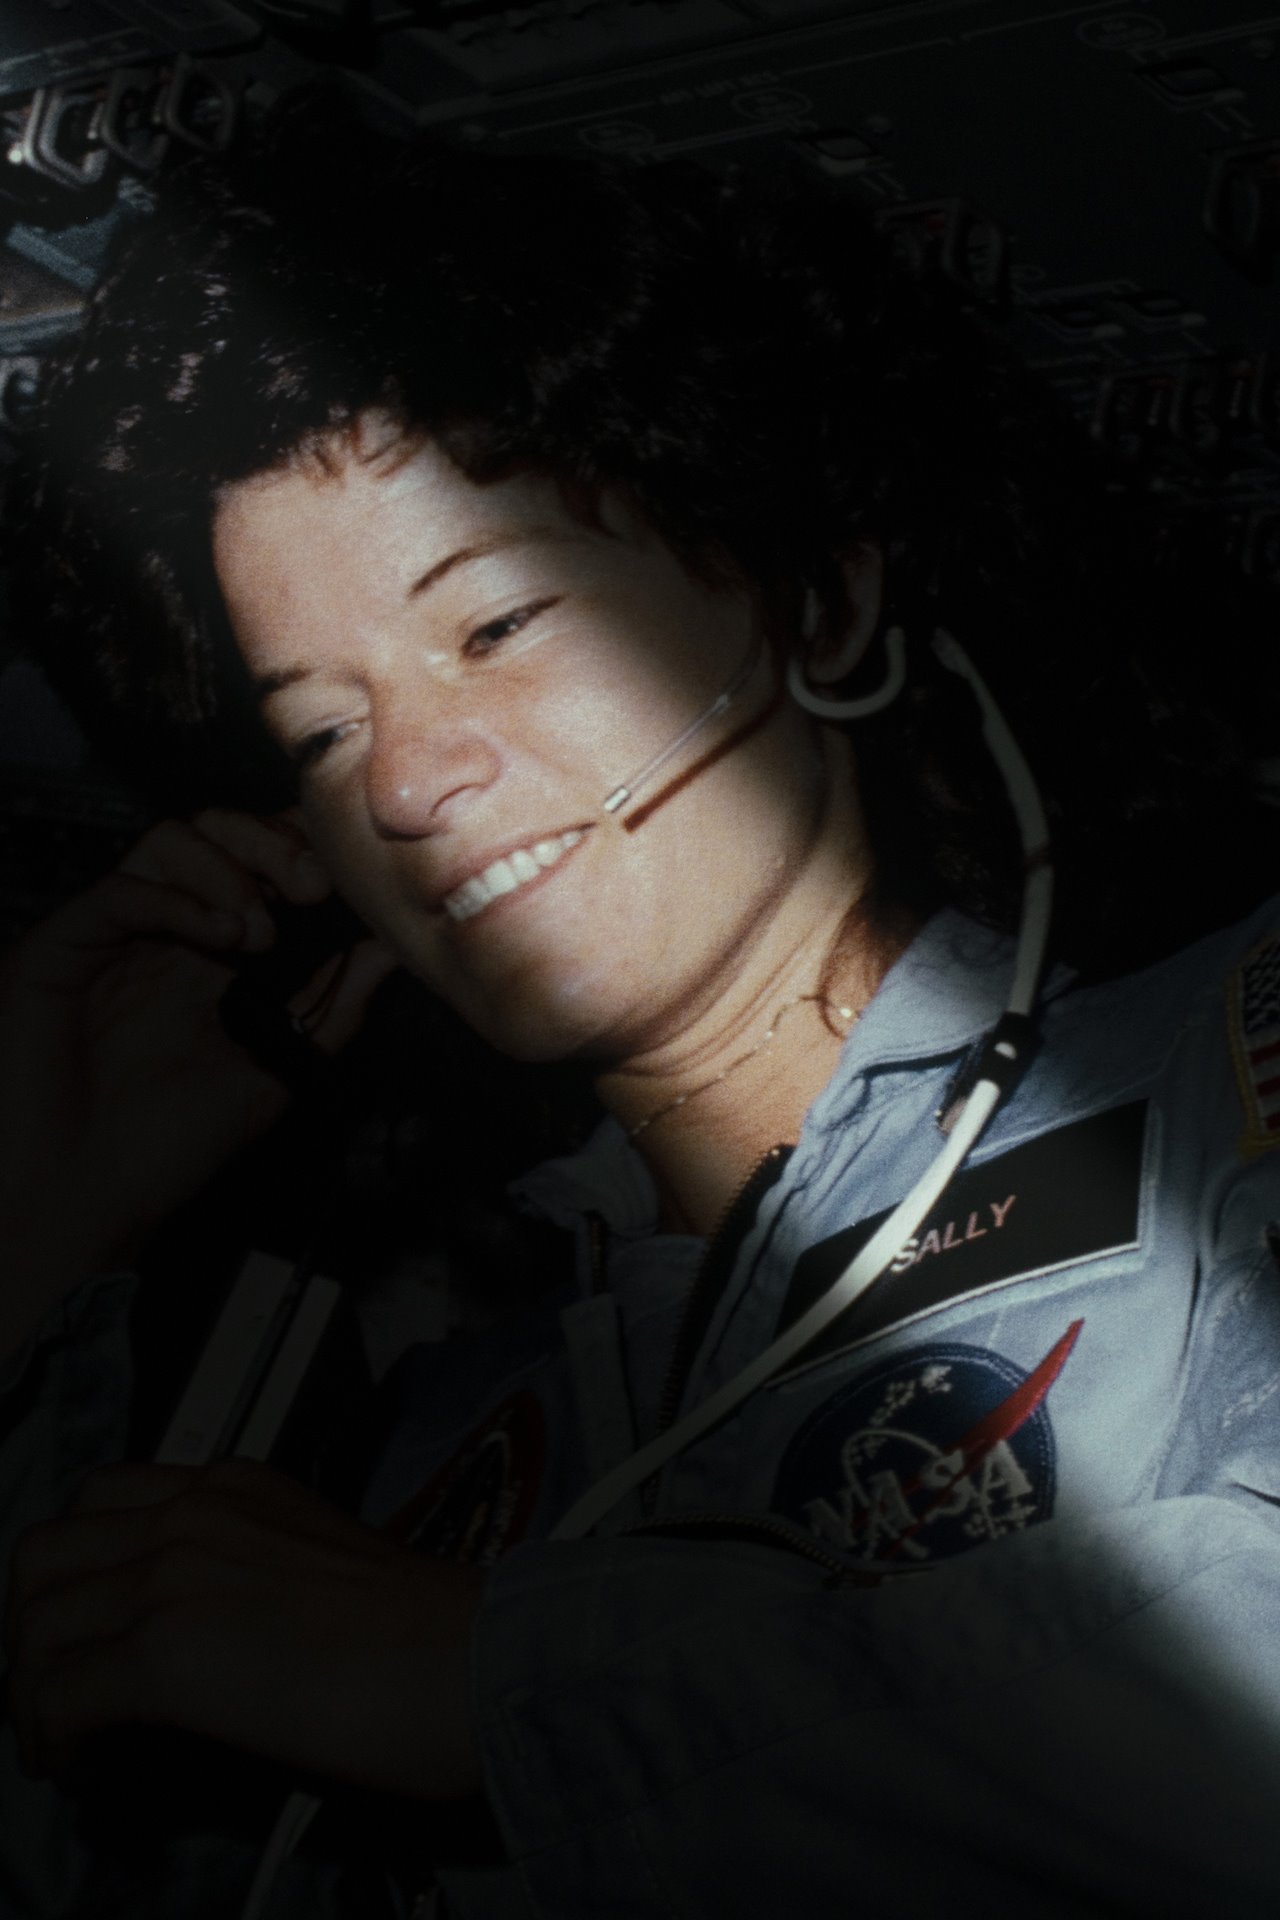 A printed and rephotographed NASA image of Dr. Sally Ride aboard the Space Shuttle Challenger during mission STS-7 in June 1983. In 1983, Dr. Sally Ride became the first American woman in space. Today, she is also recognized as the first known LGBTQI+ astronaut. However, this fact only became public after her death in 2012, when her obituary revealed that Ride was survived by her partner of 27 years, Dr. Tam O&#39;Shaughnessy.